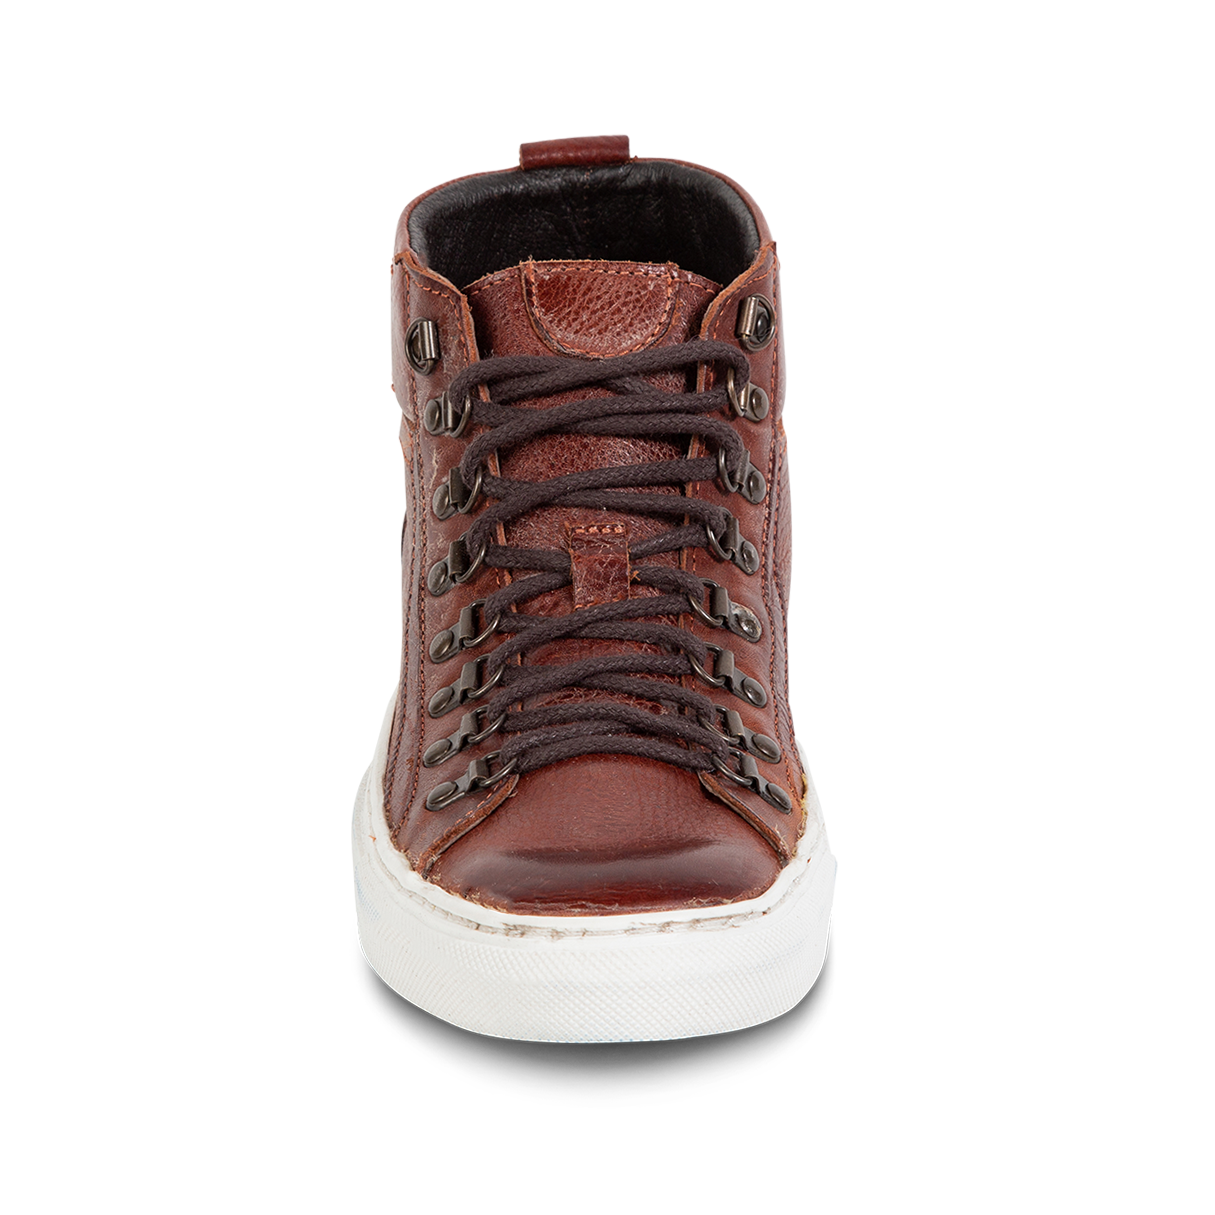 Front view showing adjustable lacing with brass hardware and leather tongue on FREEBIRD men's Shelby wine shoe